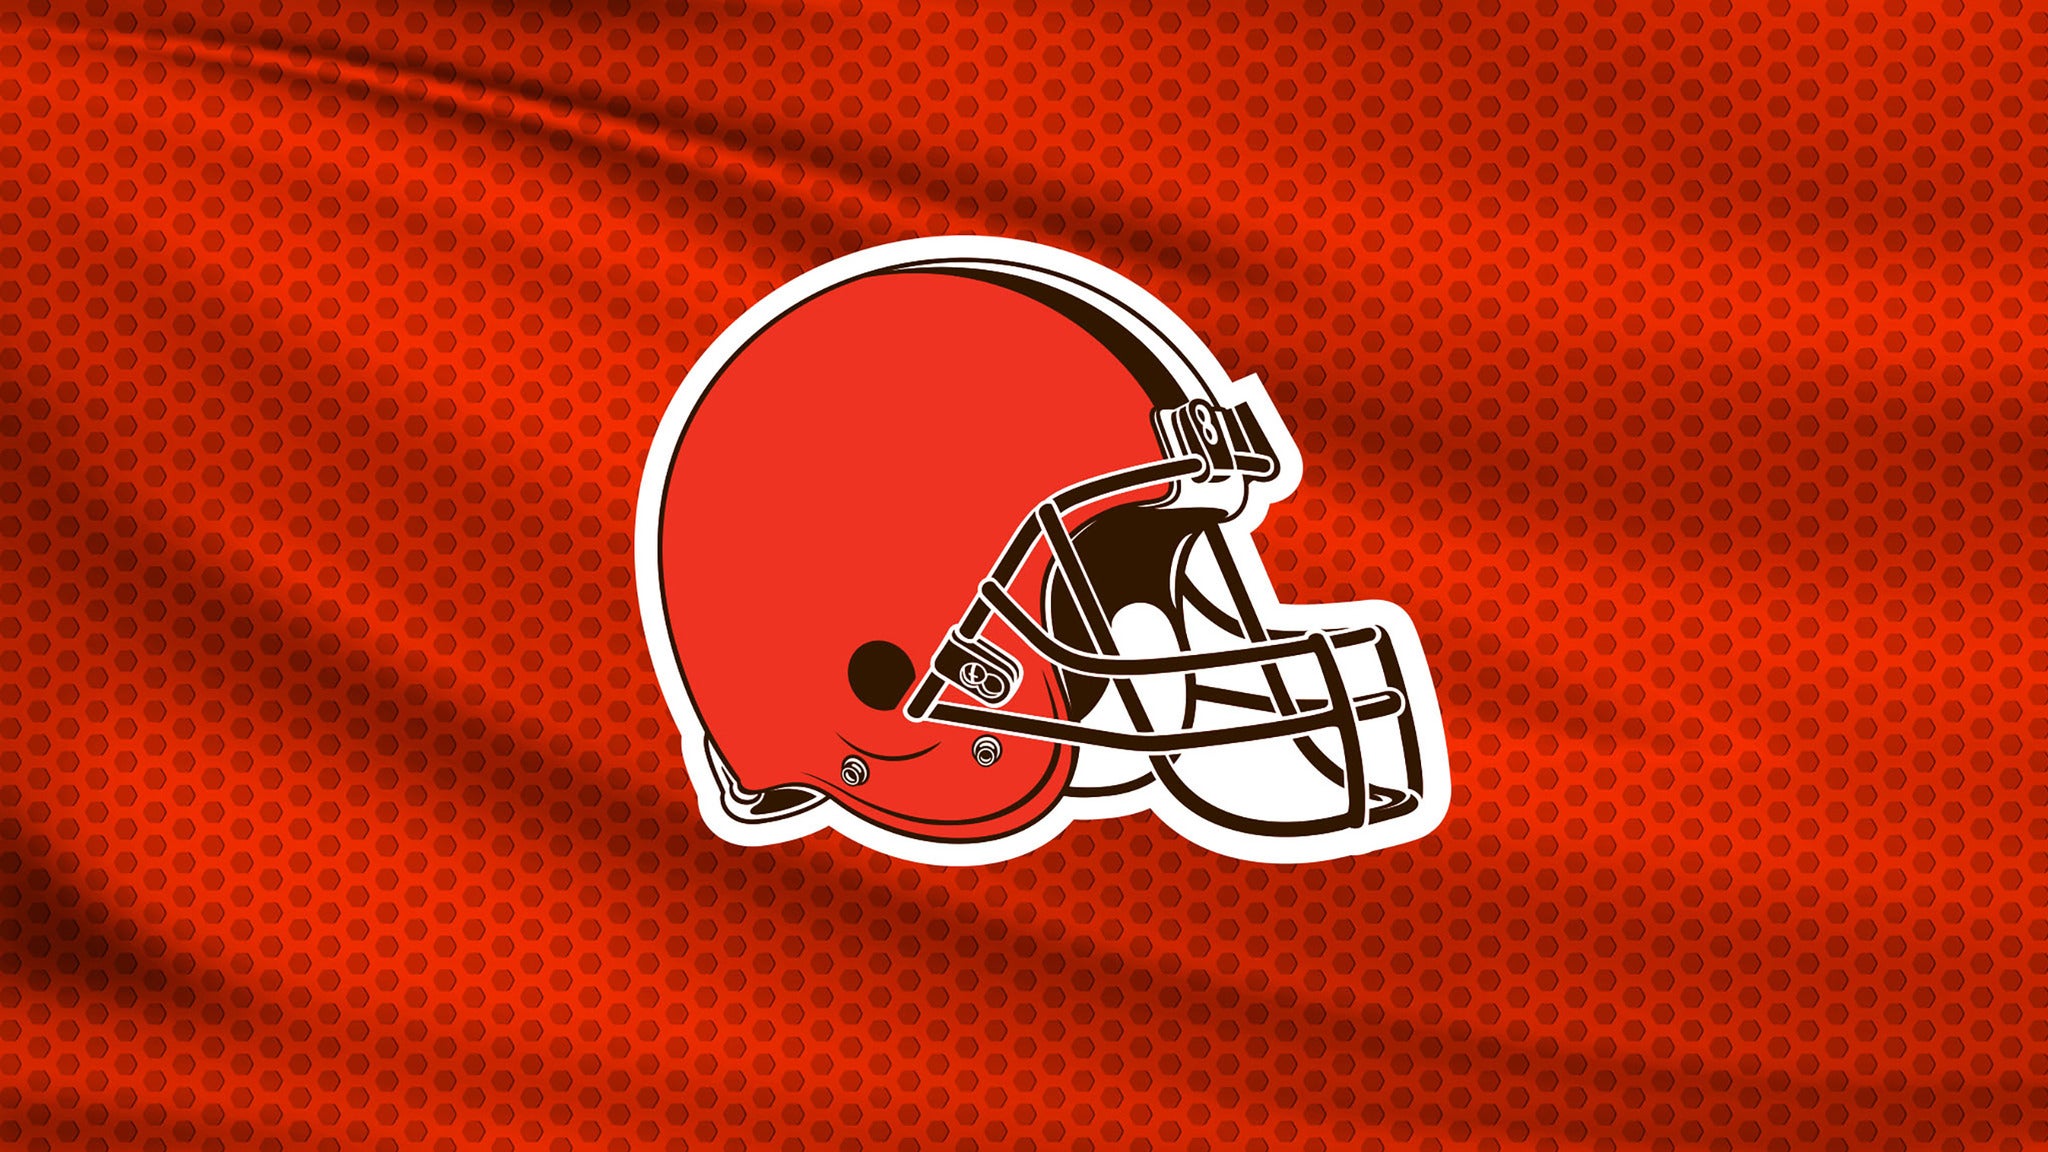 printable cleveland browns schedule 2022